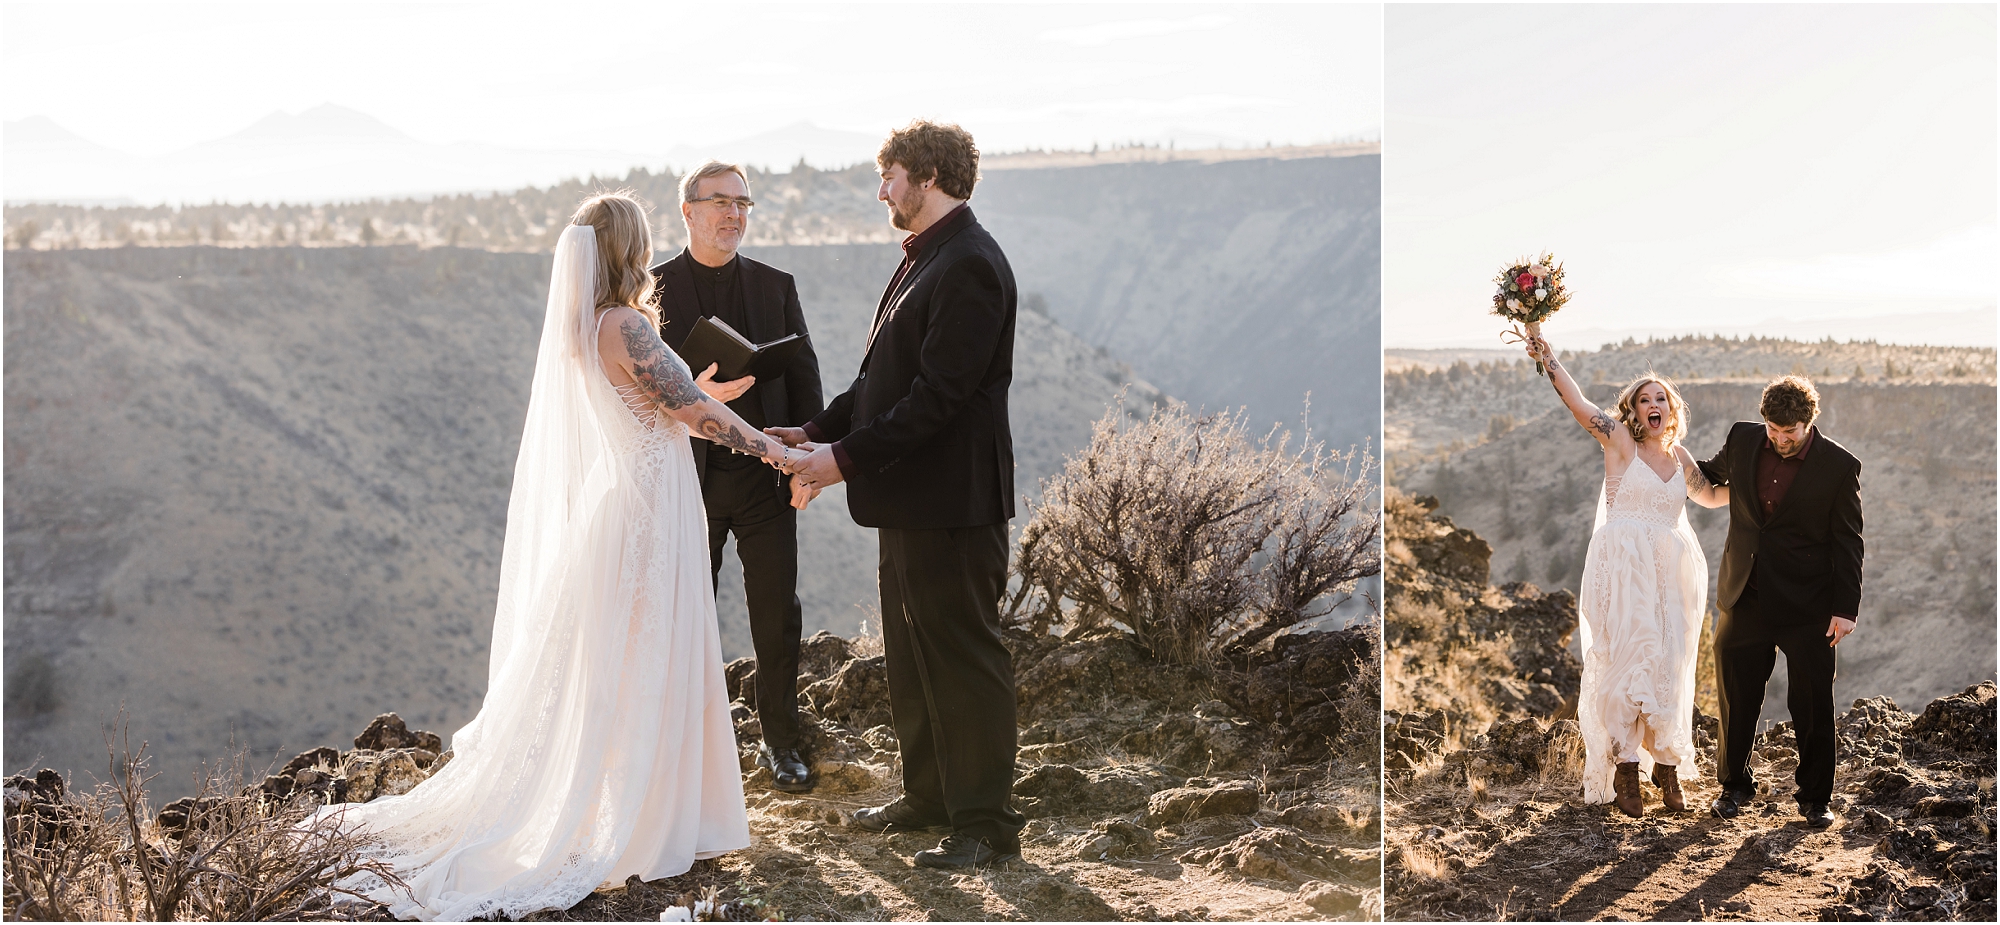 A gorgeous desert landscape for a winter elopement ceremony outside of Bend, Oregon with a tattooed bride and her handsome groom in black and burgundy. | Erica Swantek Photography